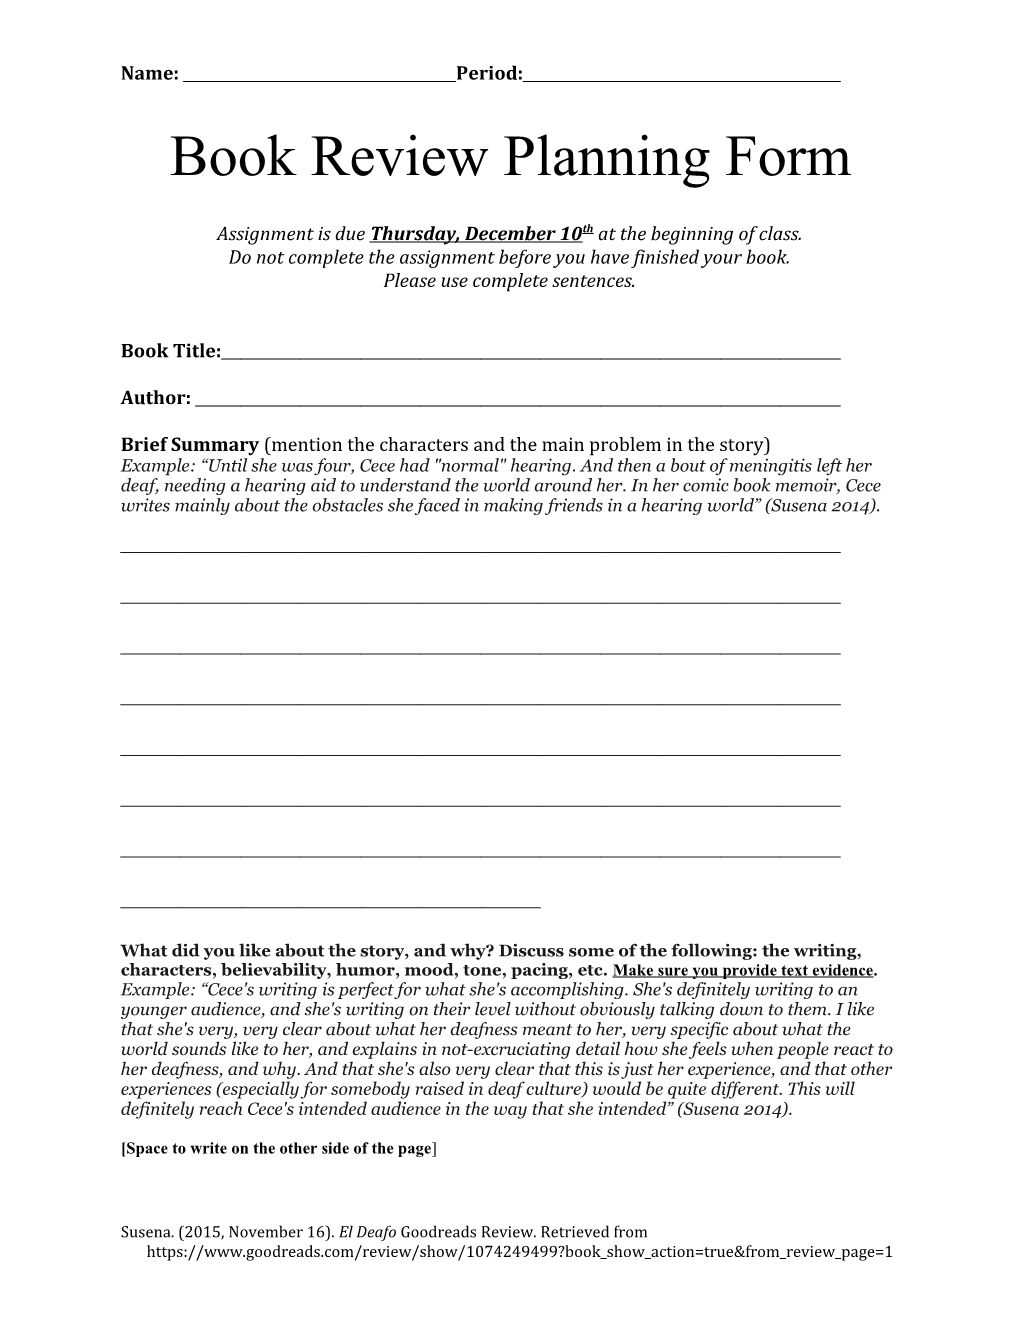 Book Review Planning Form